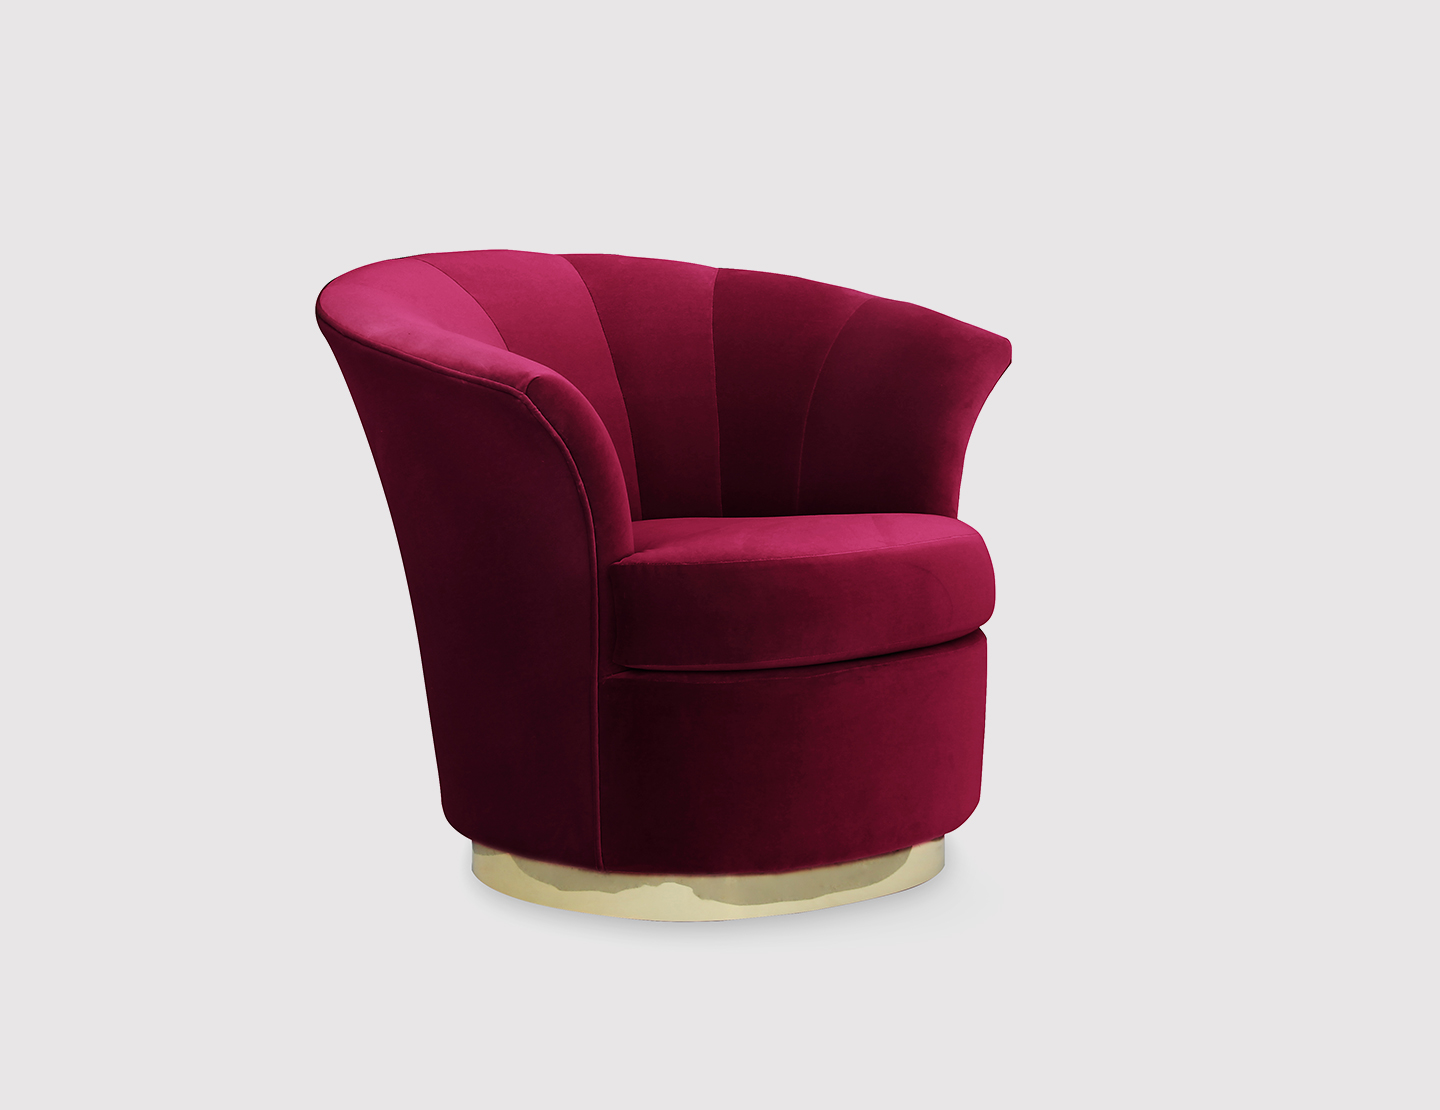 Besame Chair by Koket